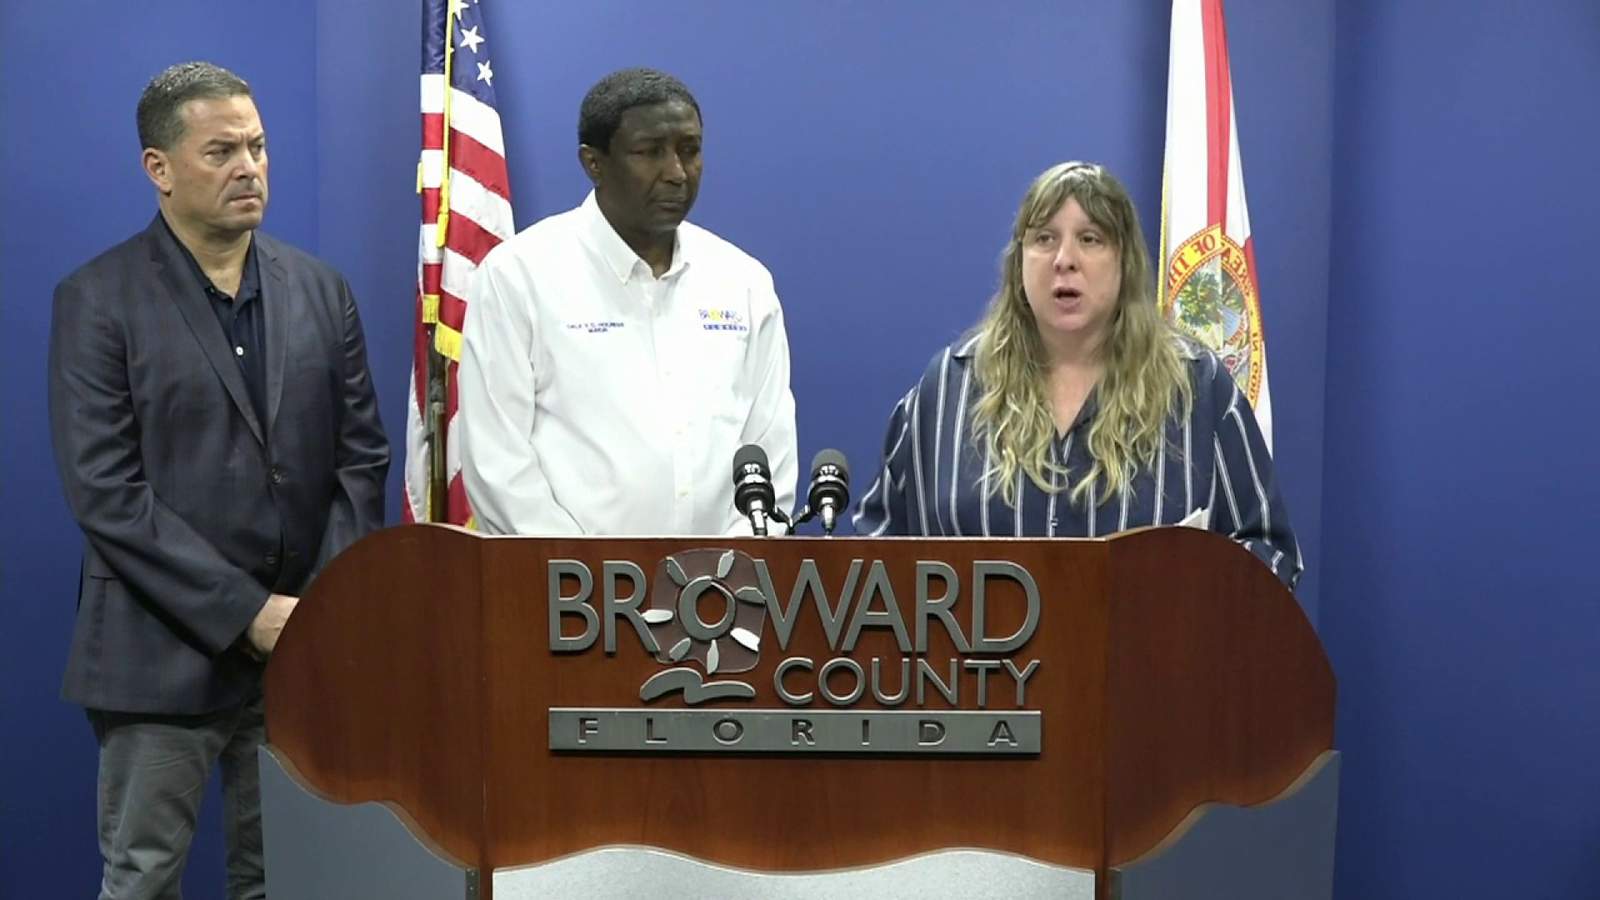 News conference held about 2 presumptive coronavirus cases in Broward County